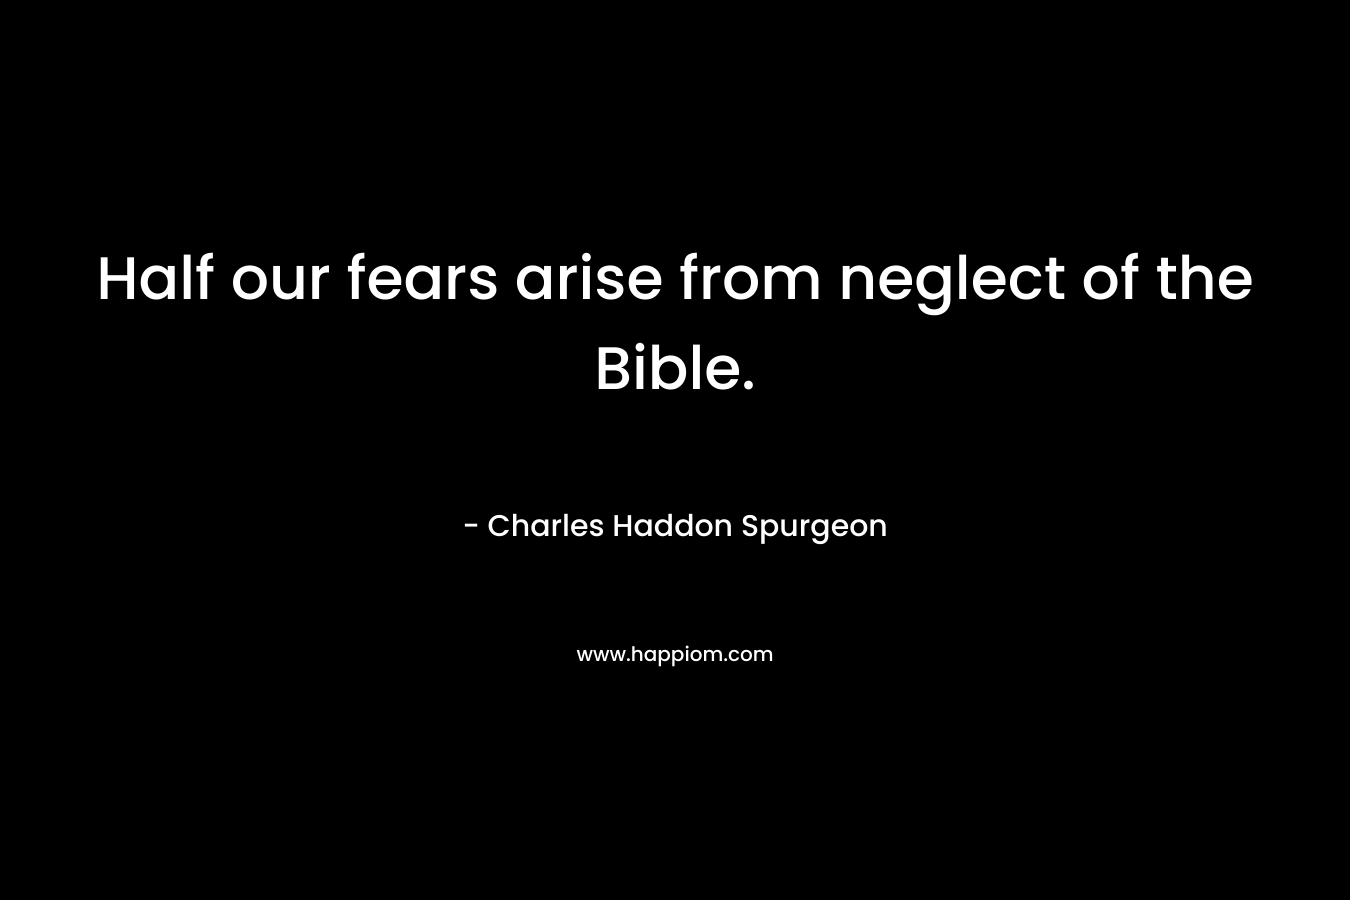 Half our fears arise from neglect of the Bible.